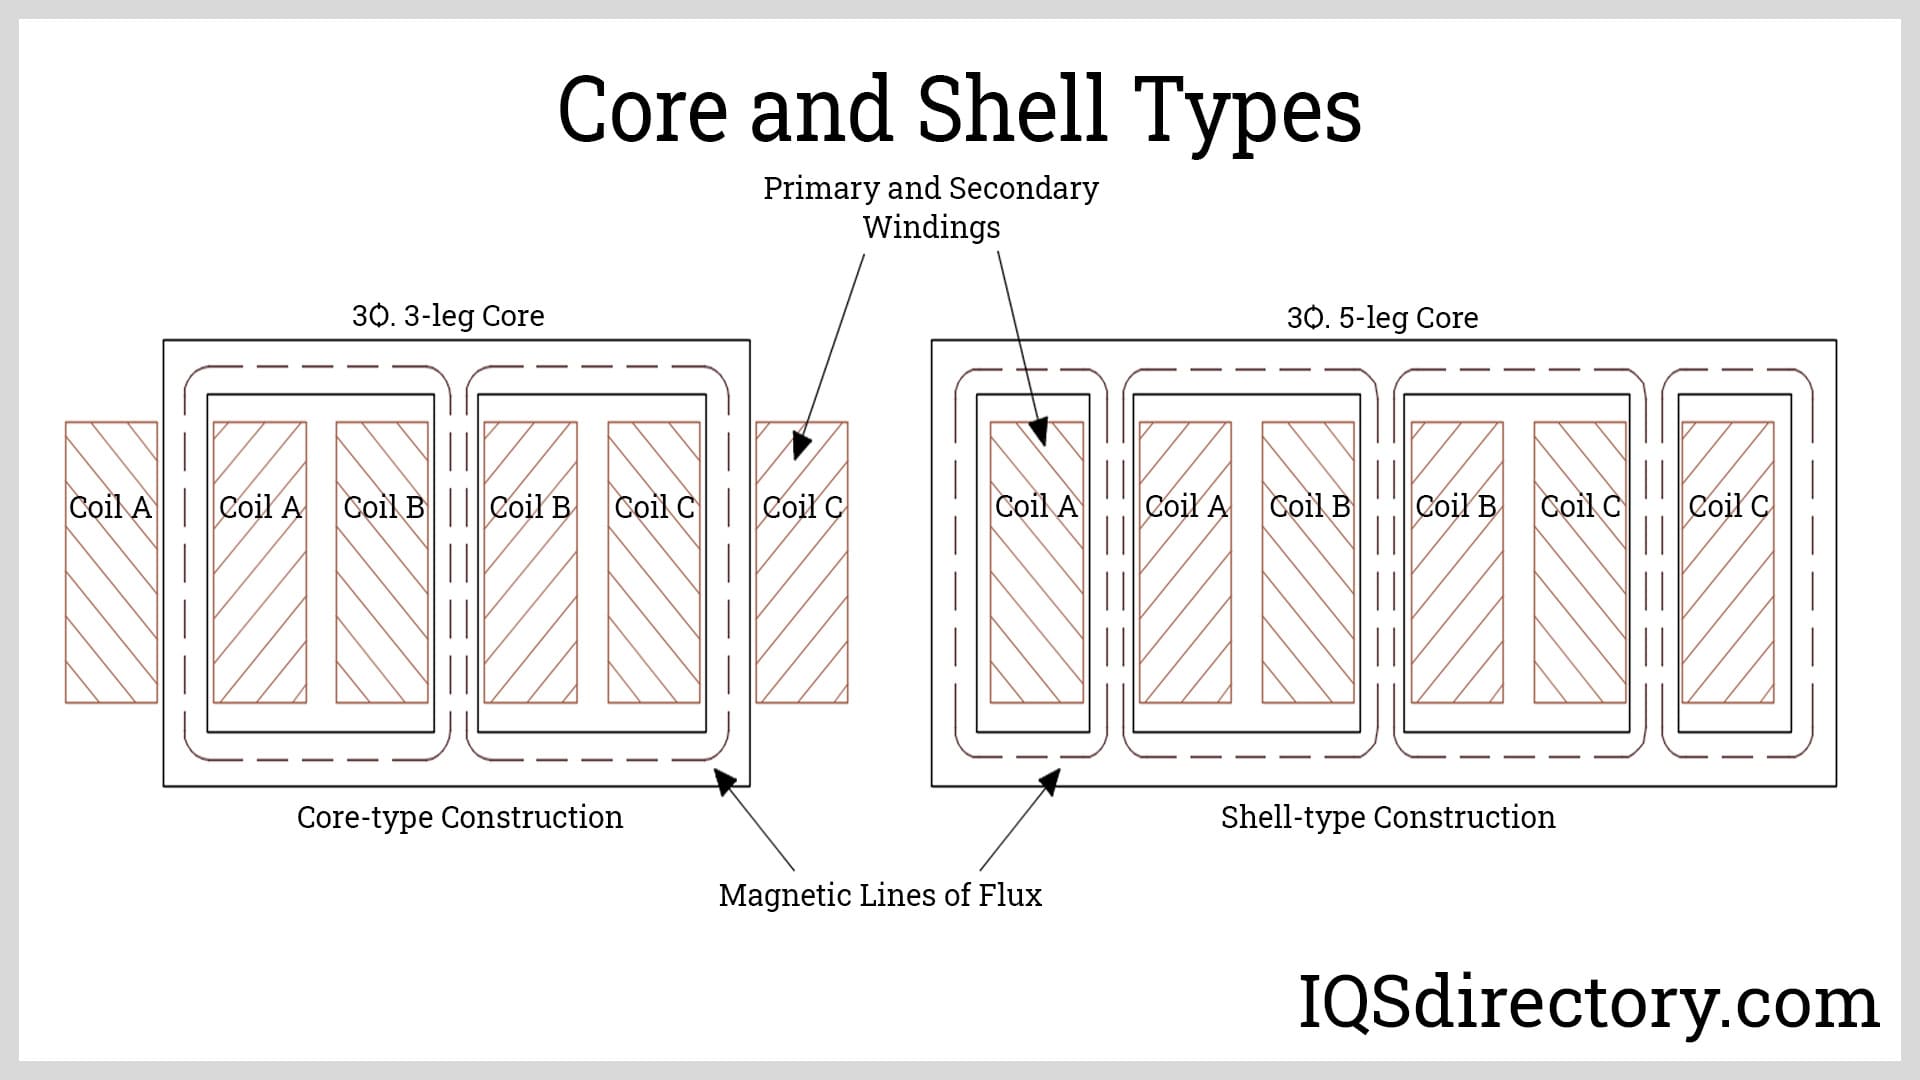 Core and Shell Types